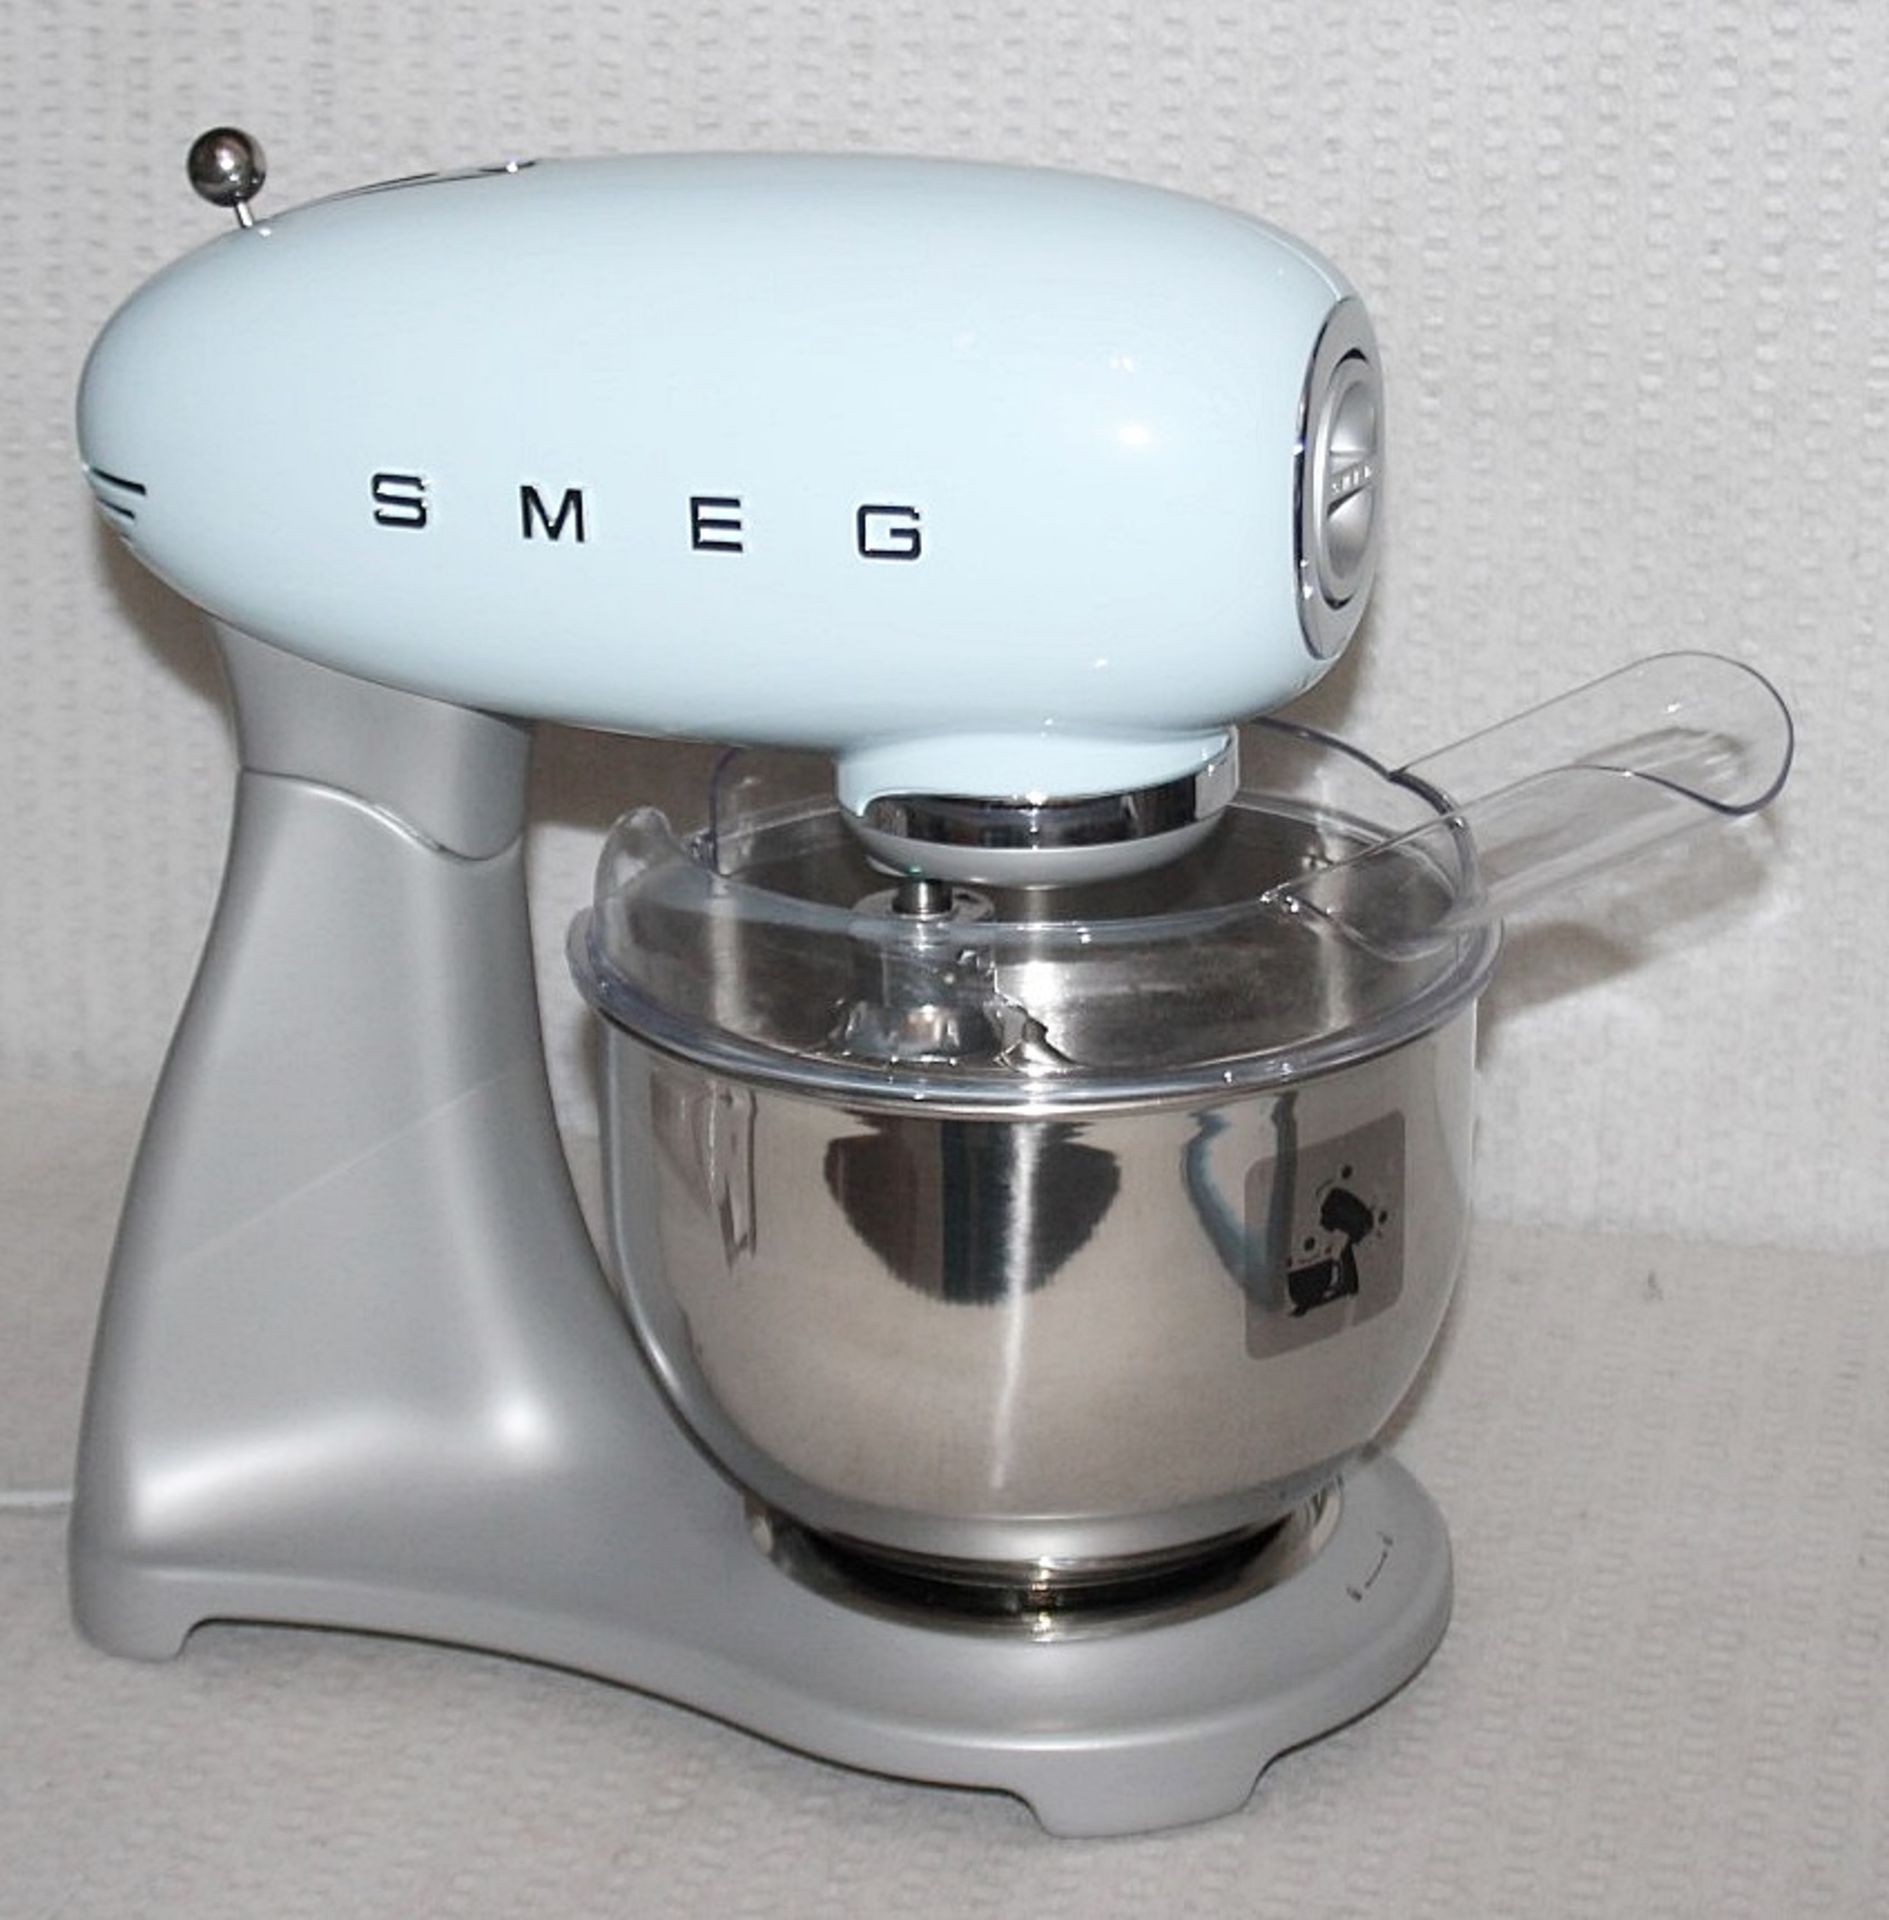 1 x SMEG 50'S Style Stand Mixer In Pale Blue (4.8L) Original Price £449.00 - Ex-Display - CL987 - - Image 3 of 14